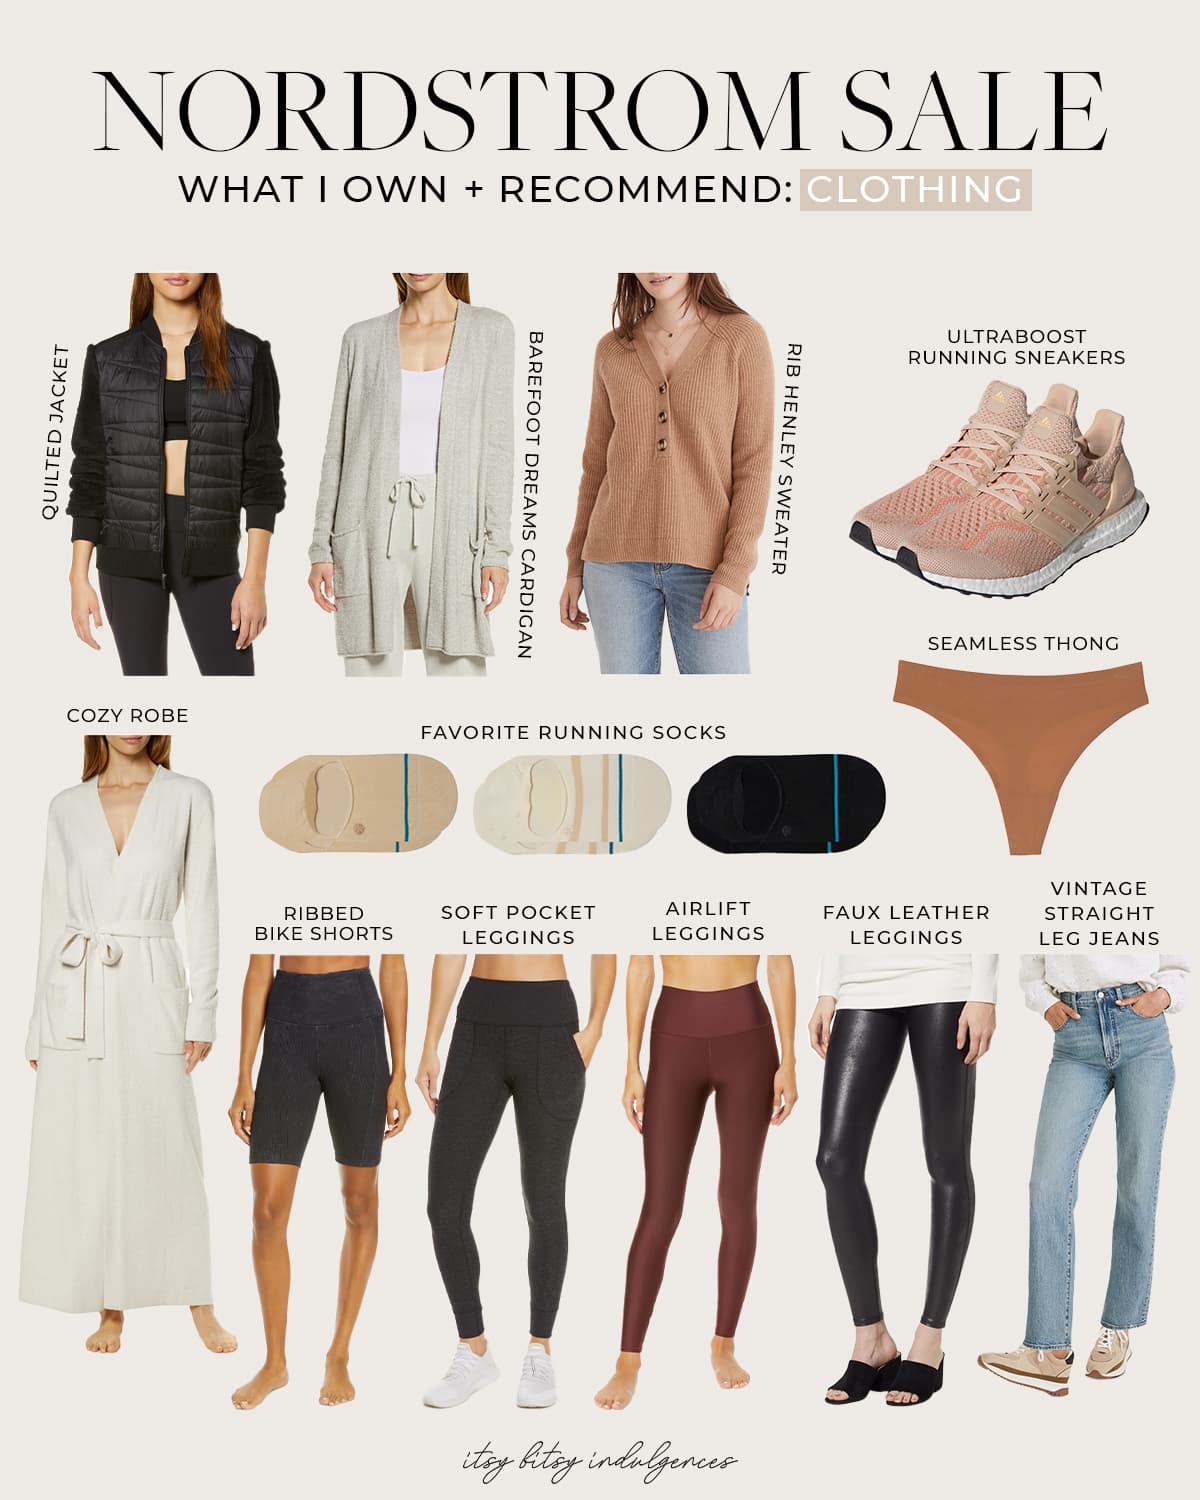 Nordstrom Anniversary Sale || The Items We Own, Love, + Recommend ...